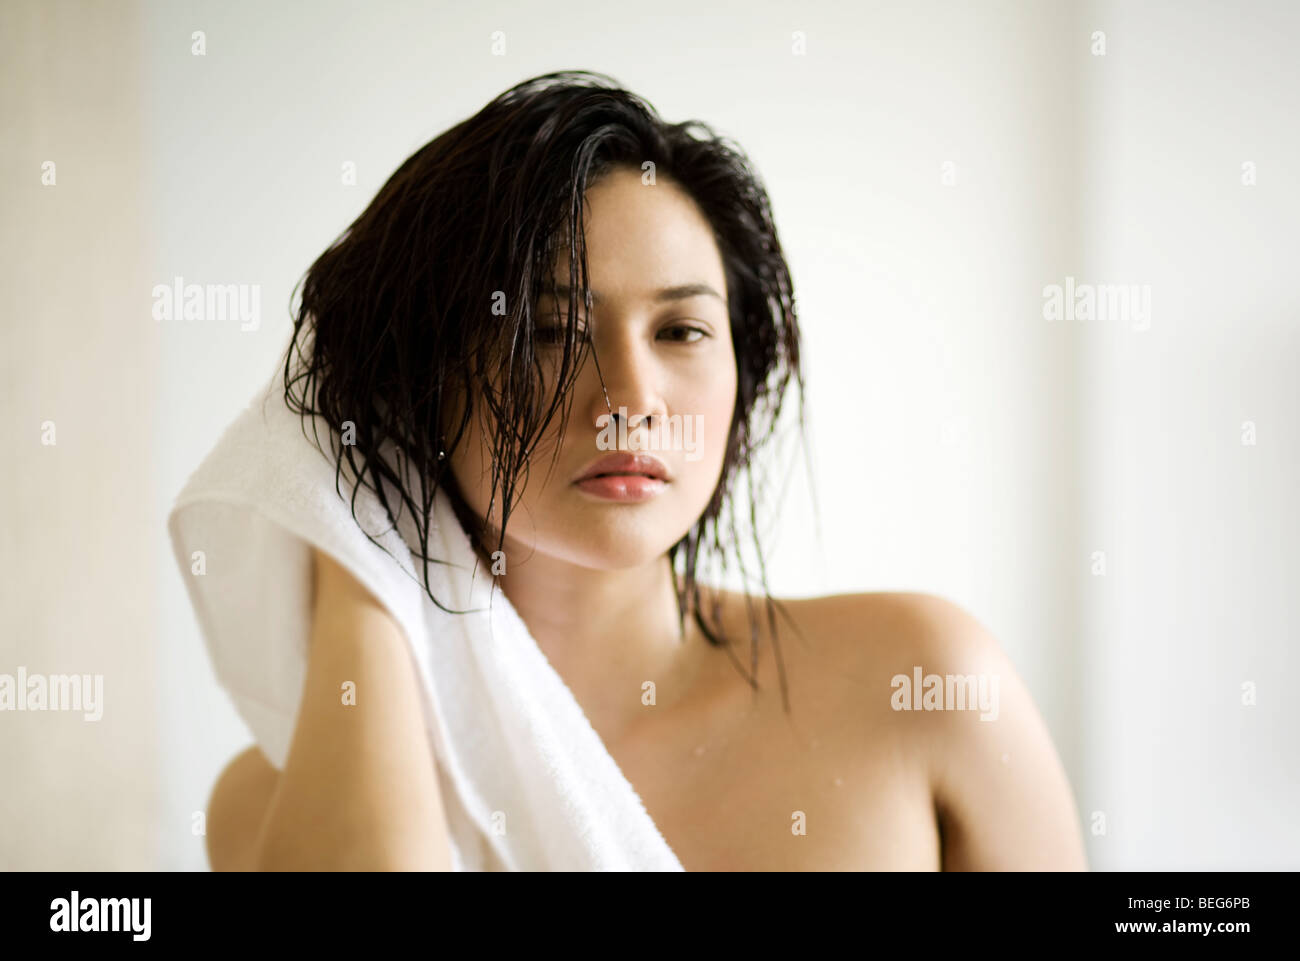 Portrait of a young woman drying her hair with a towel Stock Photo